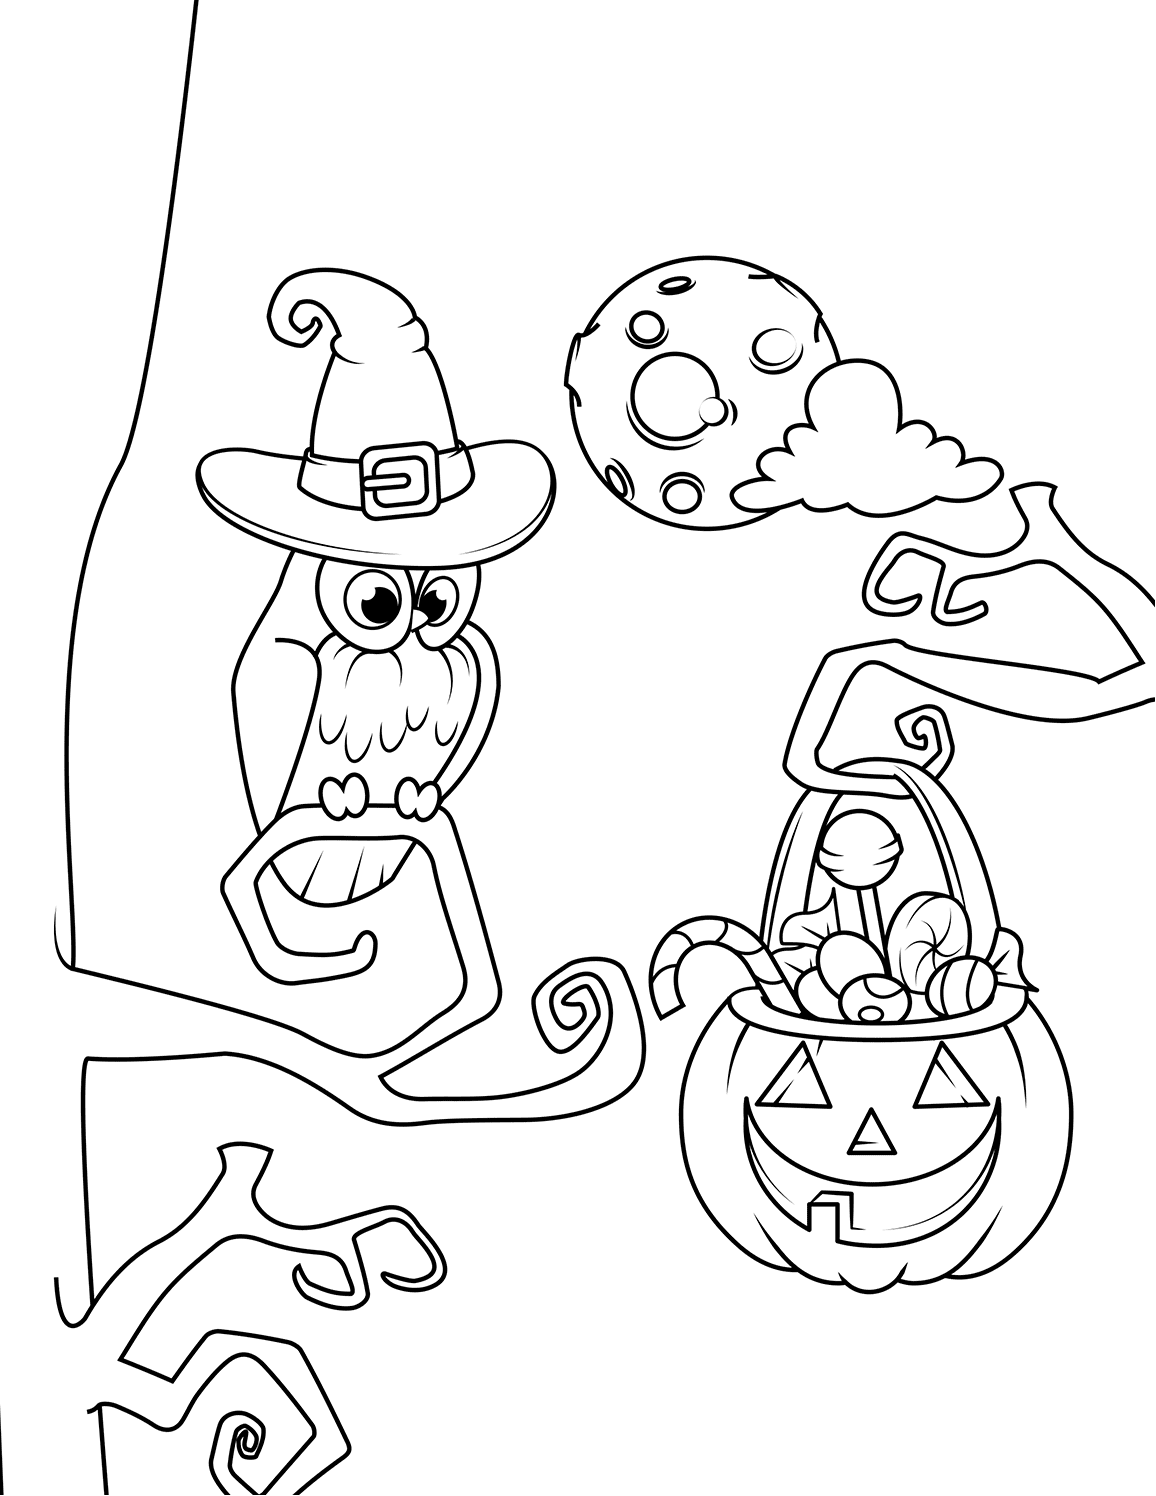 Owl And Jack O Lantern With Candies Halloween